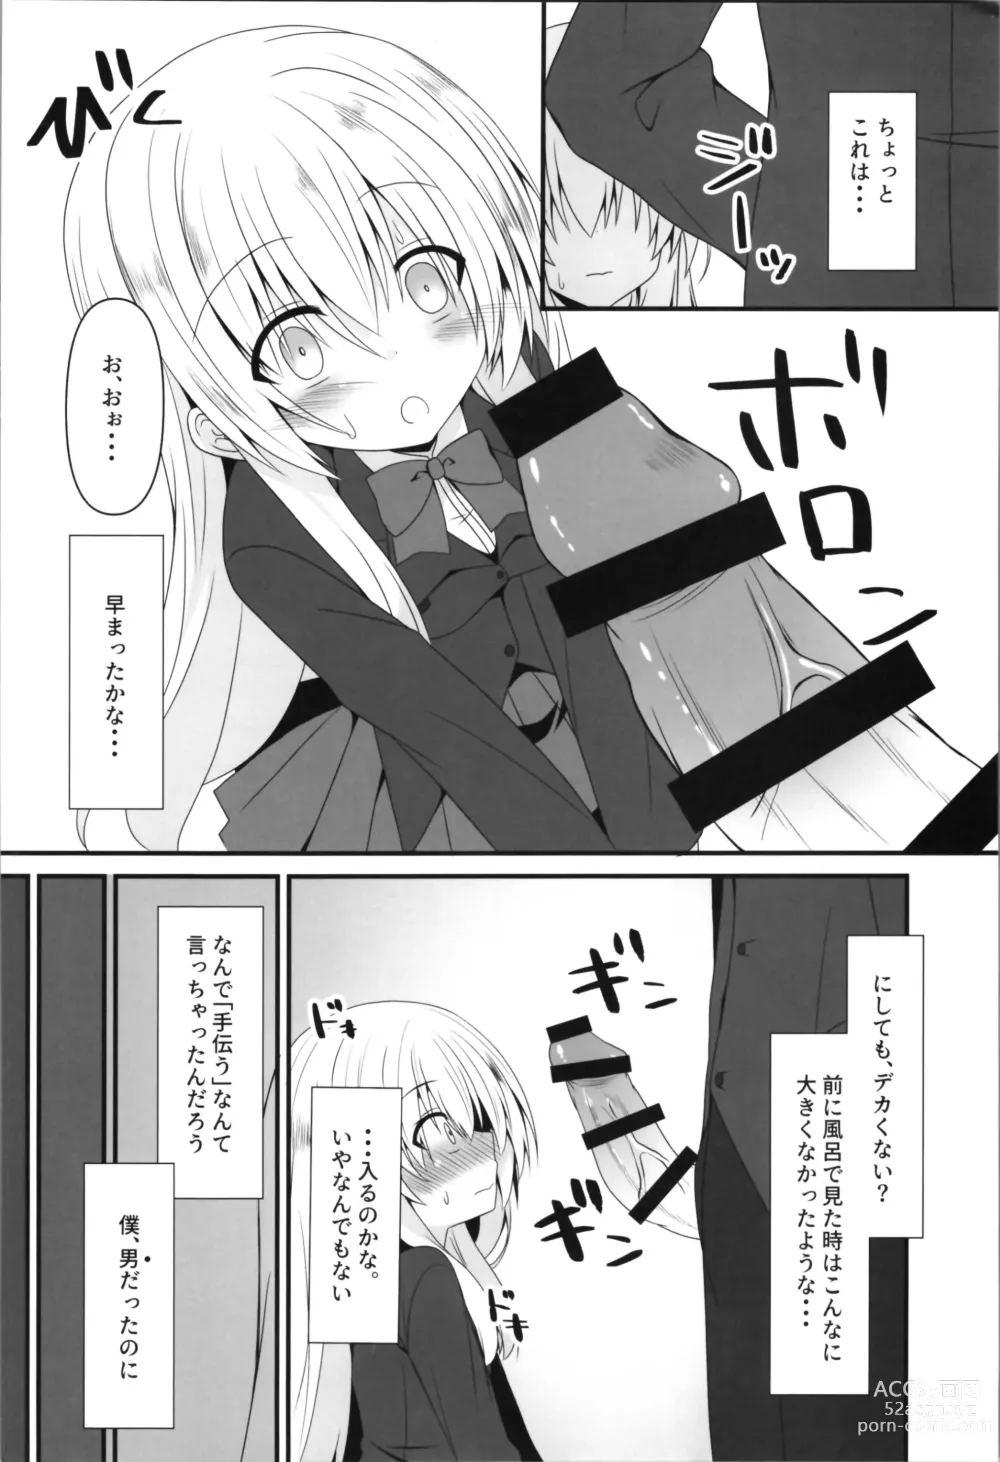 Page 4 of doujinshi Being an understanding person, I decided to help my best friend.